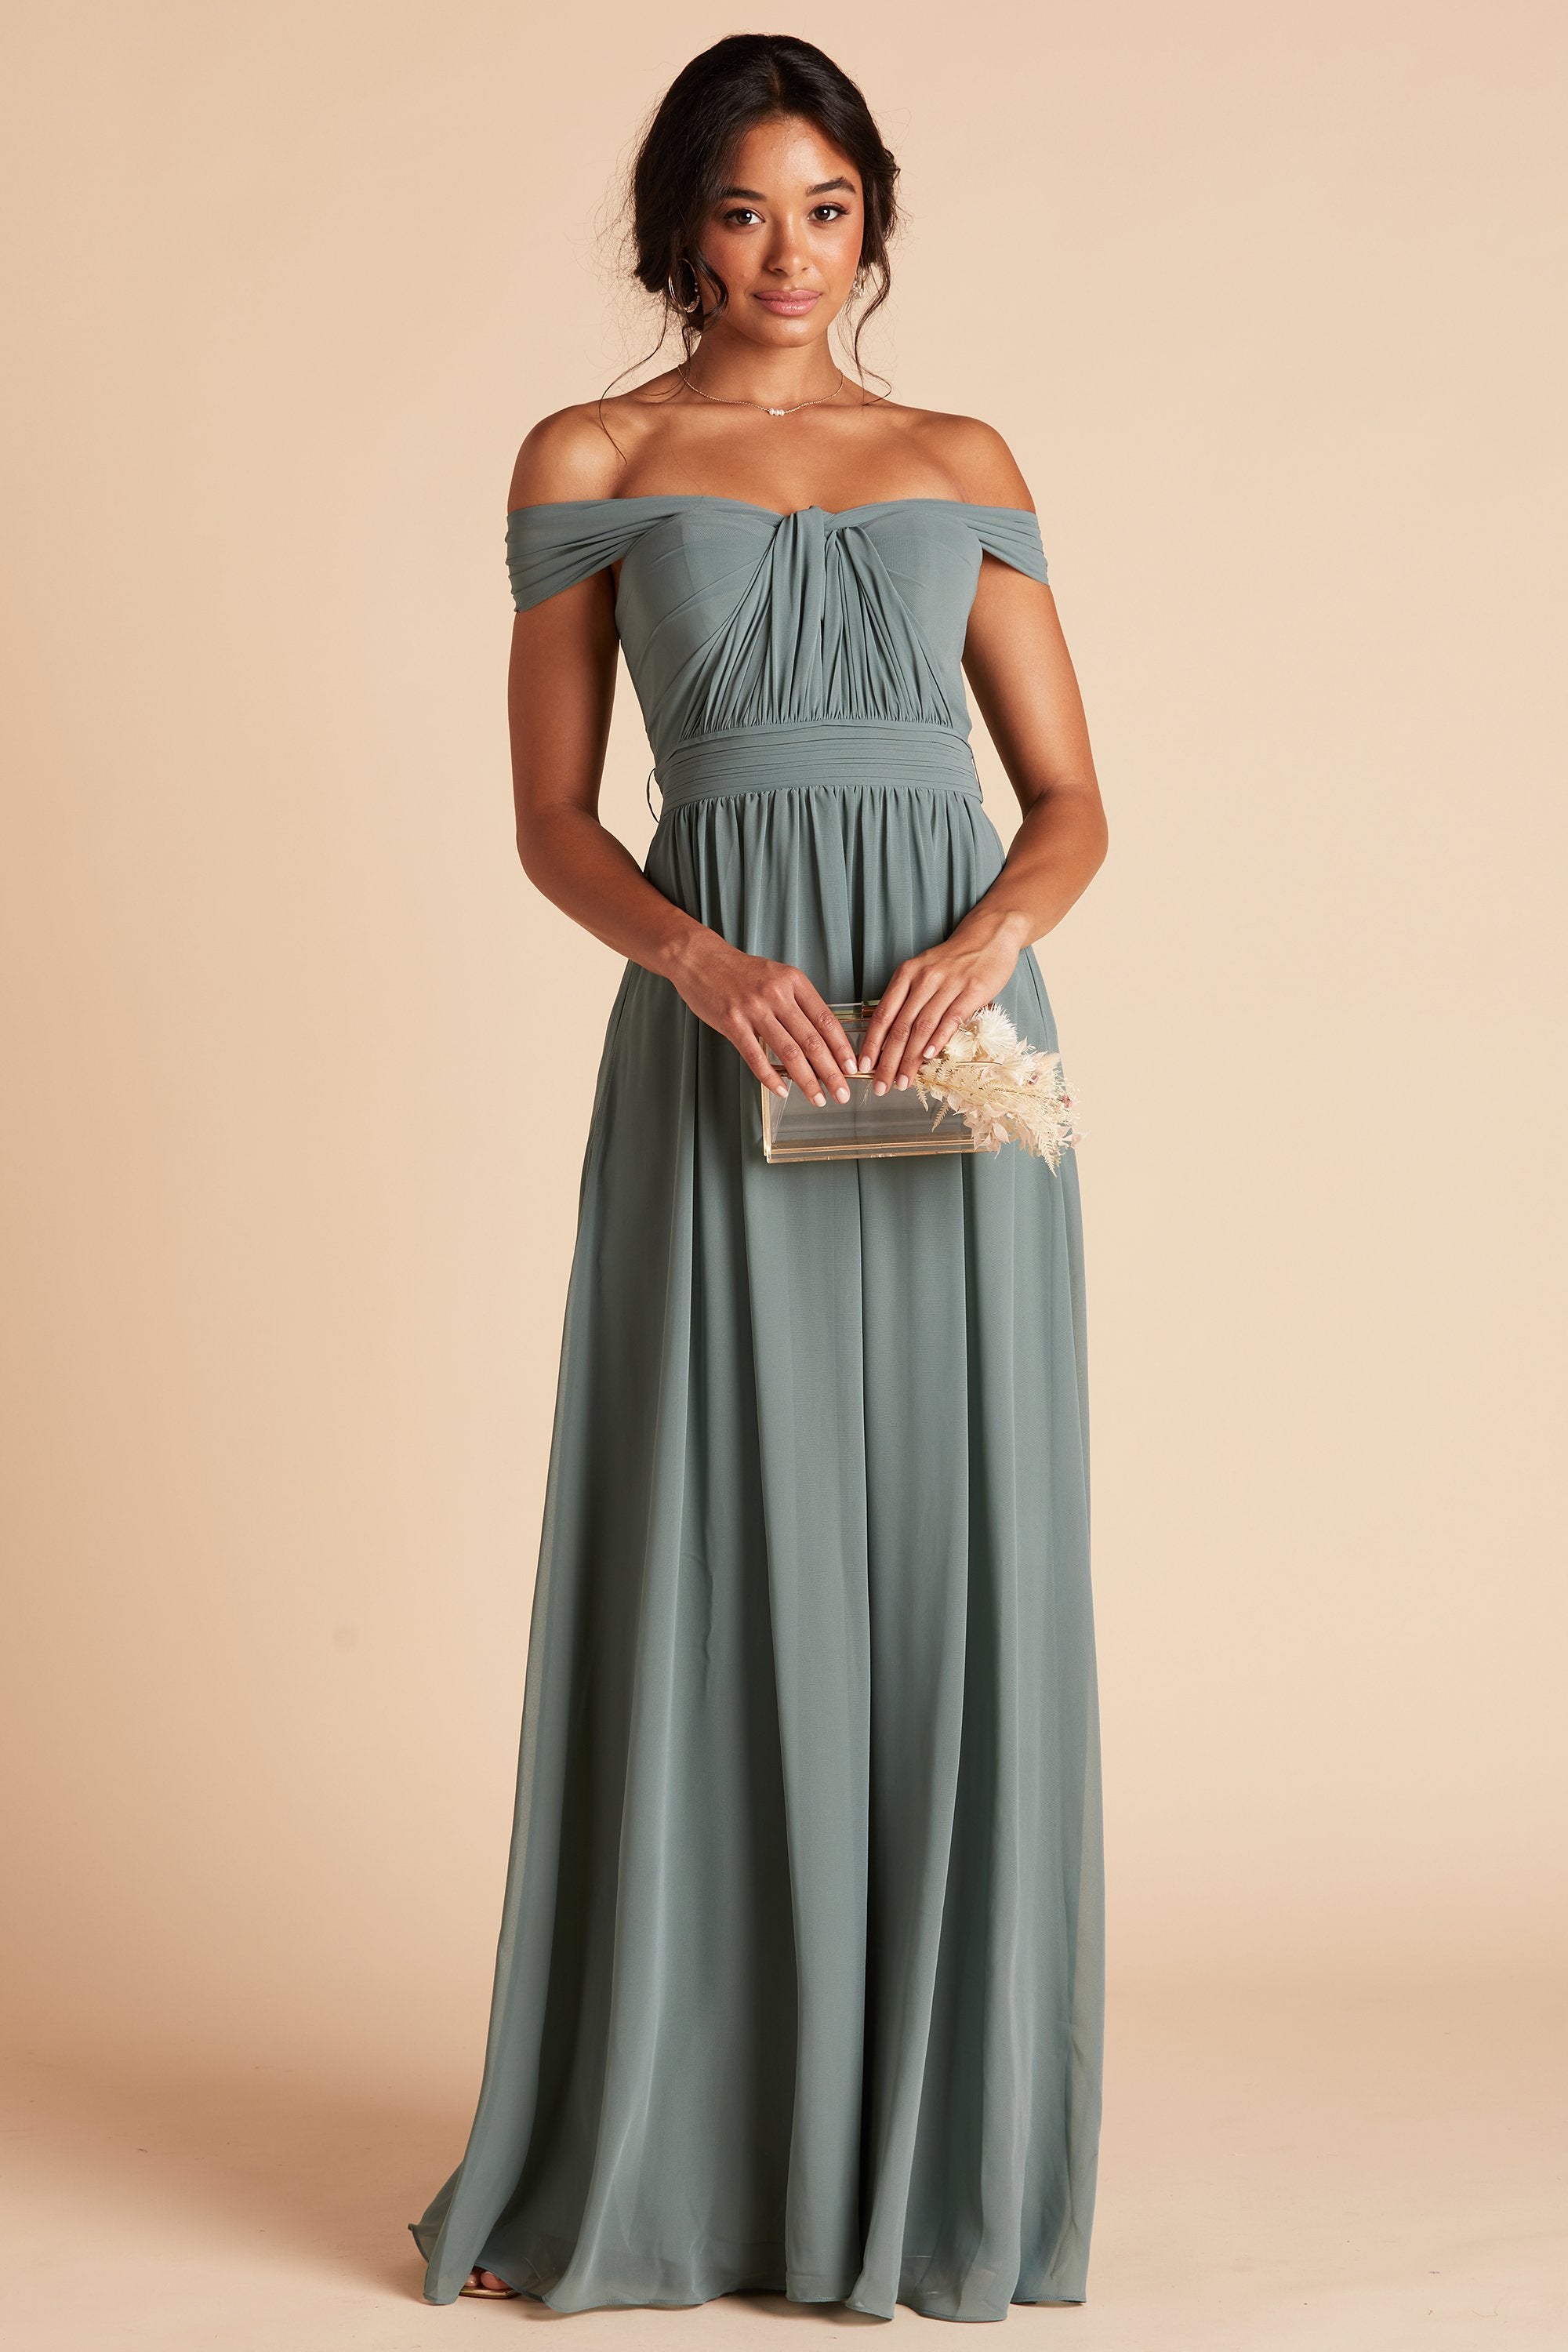 Front view of the floor-length Grace Convertible Bridesmaid Dress in sea glass chiffon by Birdy Grey features a sweetheart neckline with front streamers draped gracefully over each arm for an off-the-shoulder look.